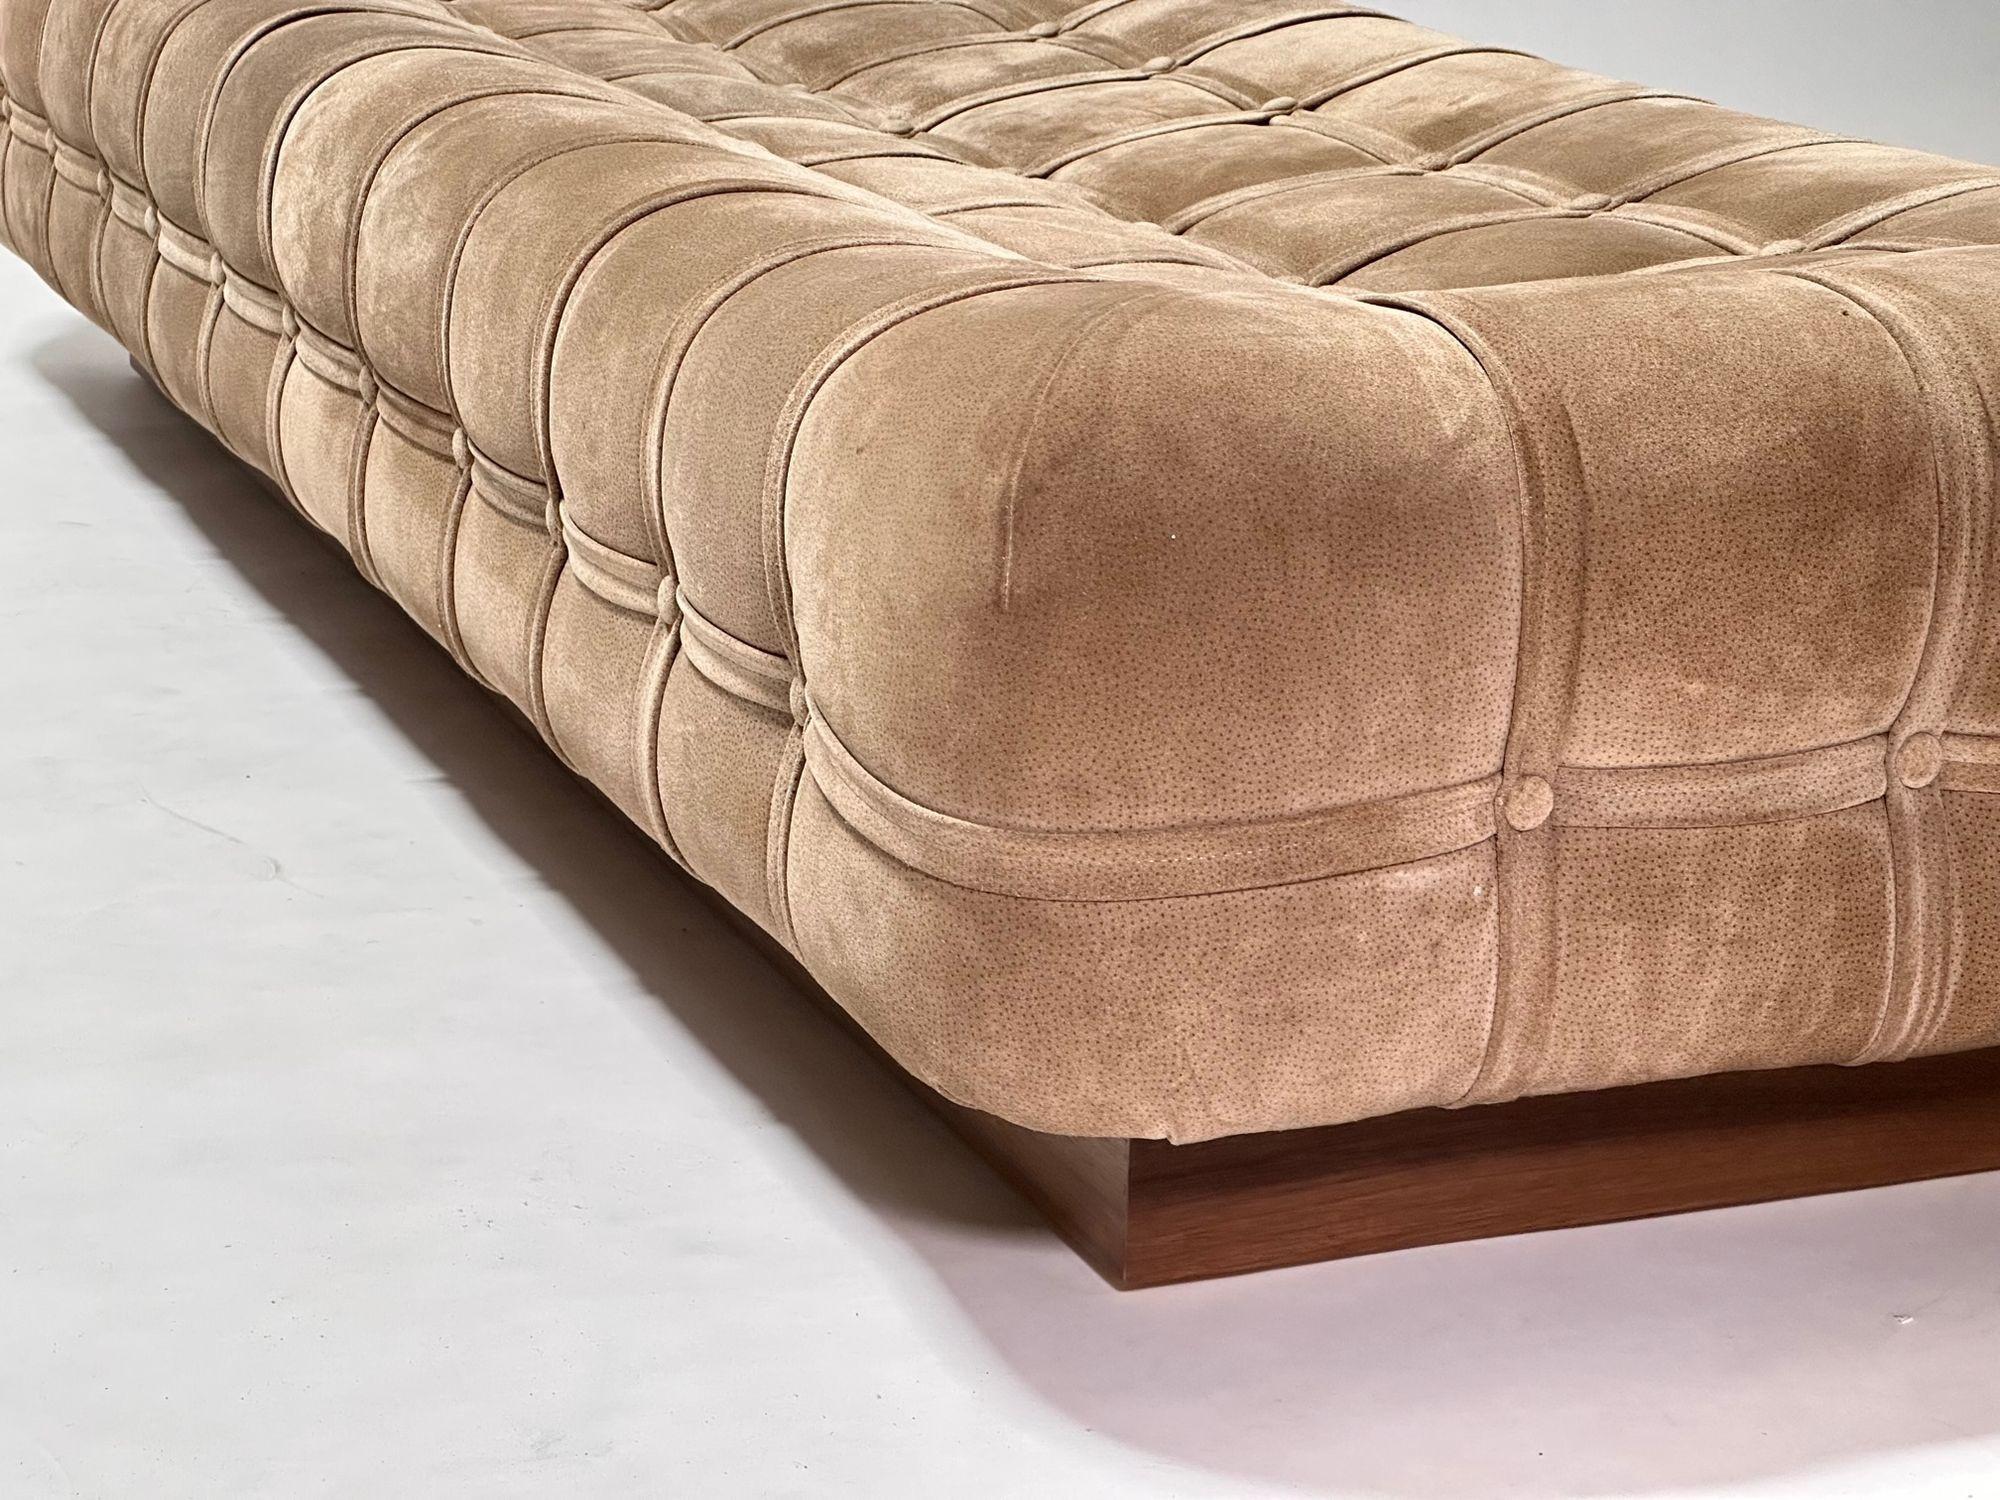 Late 20th Century Suede Marshmallow Pouf Bench/ Daybed on Walnut Plinth Base, 1970